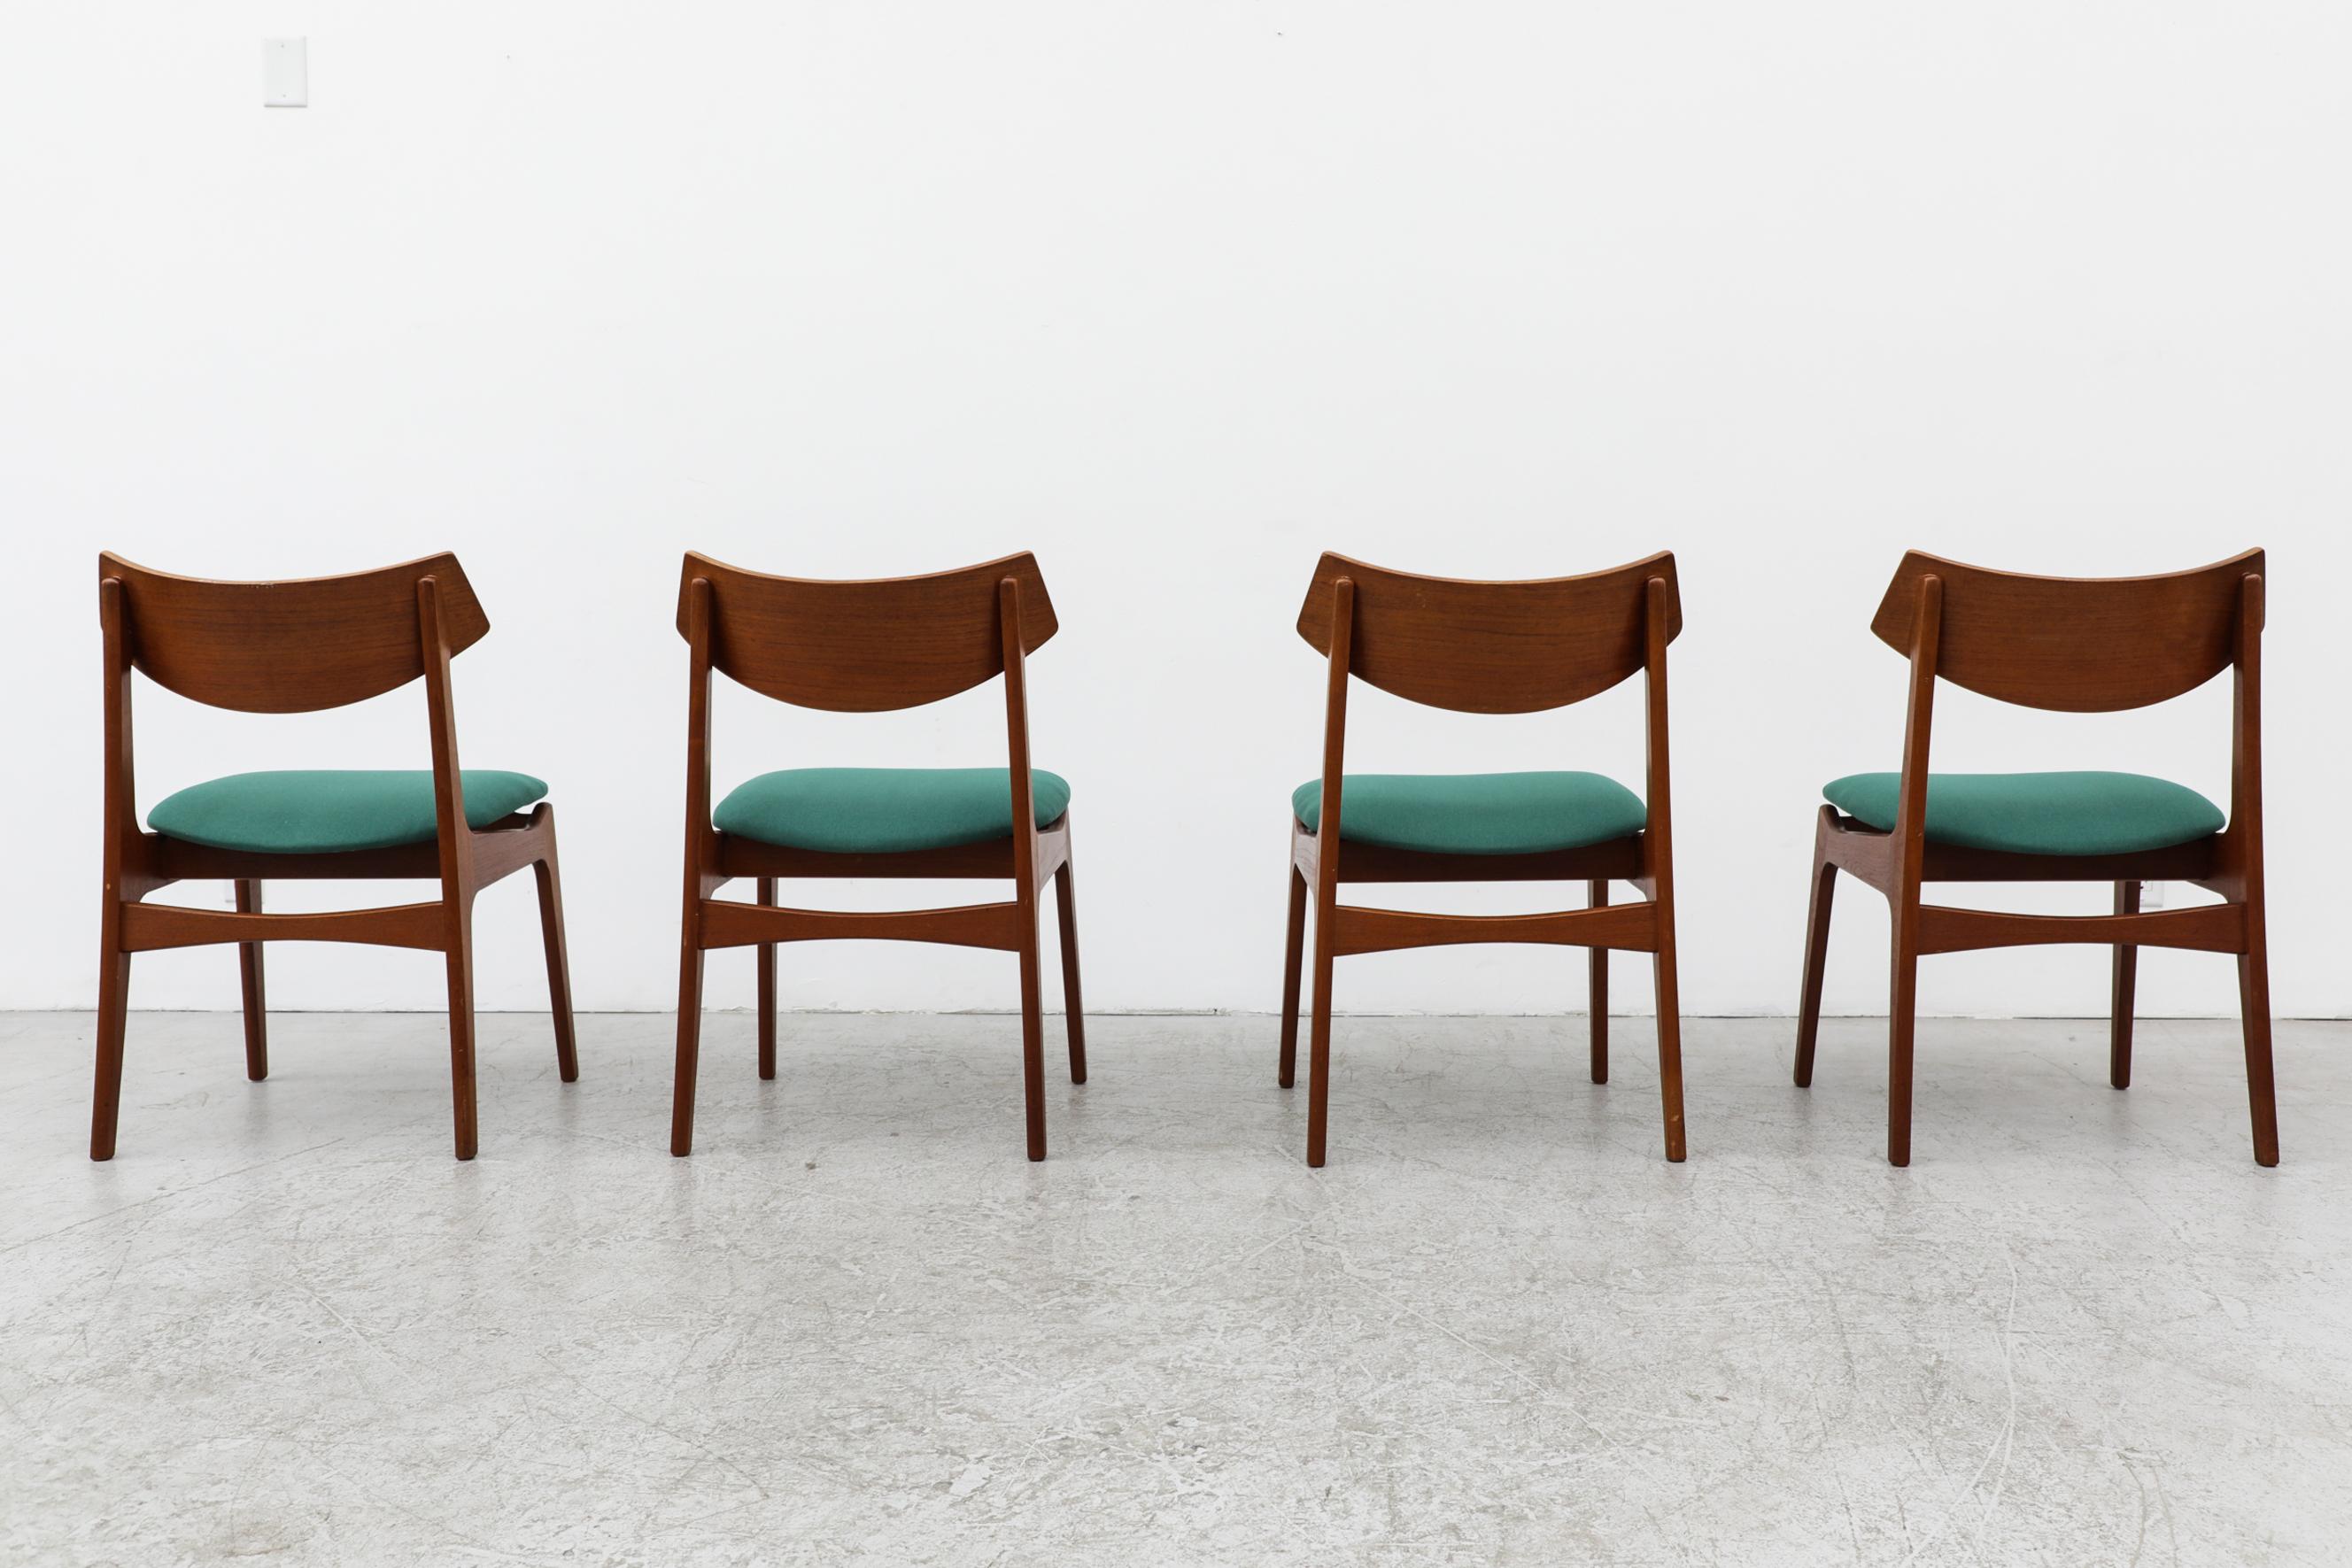 Mid-20th Century Set of 4 Danish Teak Dining Chairs by Funder Schmidt + Madsen w/ Teal Seats